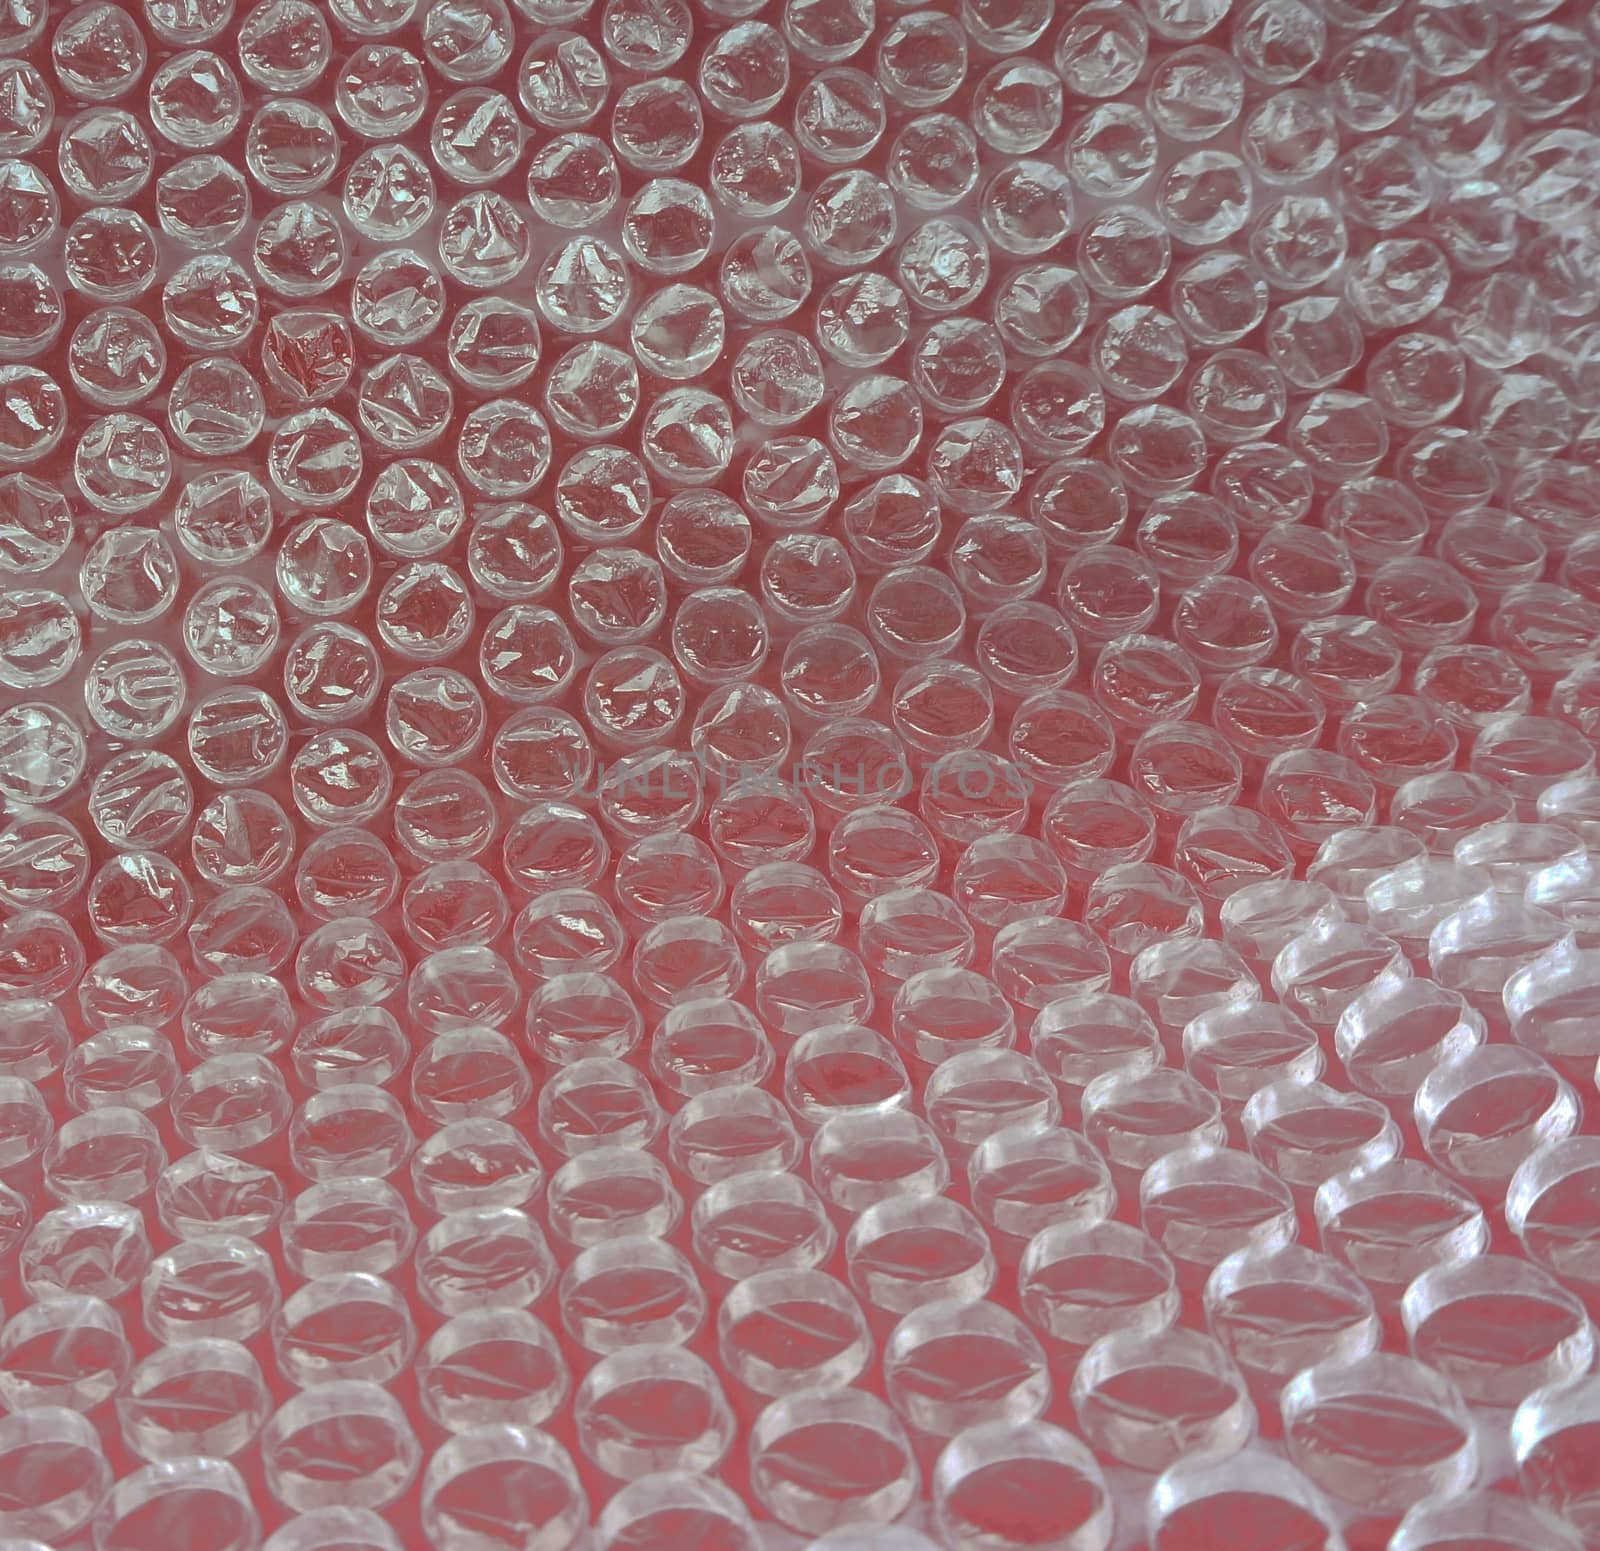 Bubble wrap, there are lots of bubbles blister to prevent shock.                            